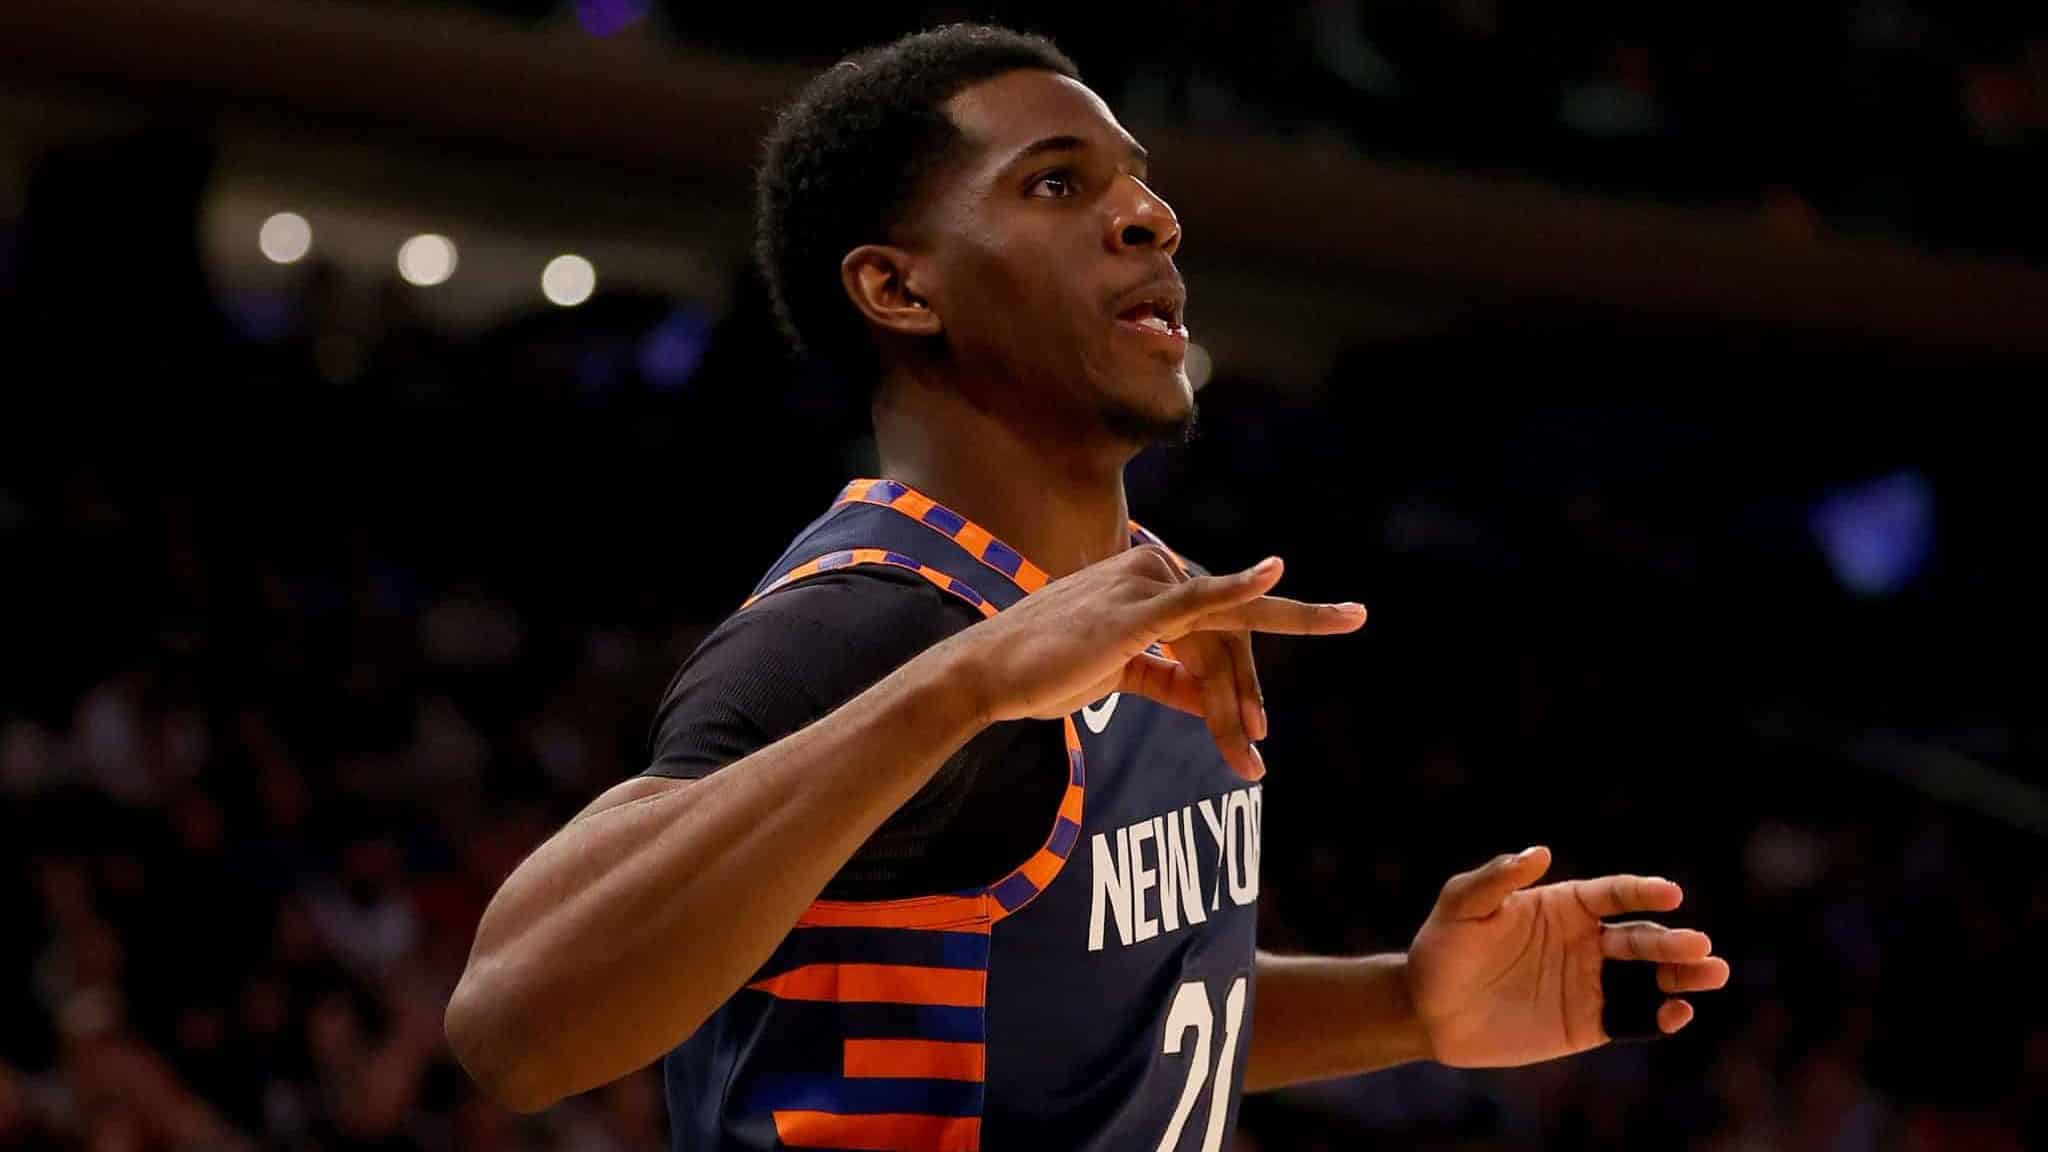 NEW YORK, NEW YORK - JANUARY 16: Damyean Dotson #21 of the New York Knicks celebrates his three point shot in the first half against the Phoenix Suns at Madison Square Garden on January 16, 2020 in New York City.